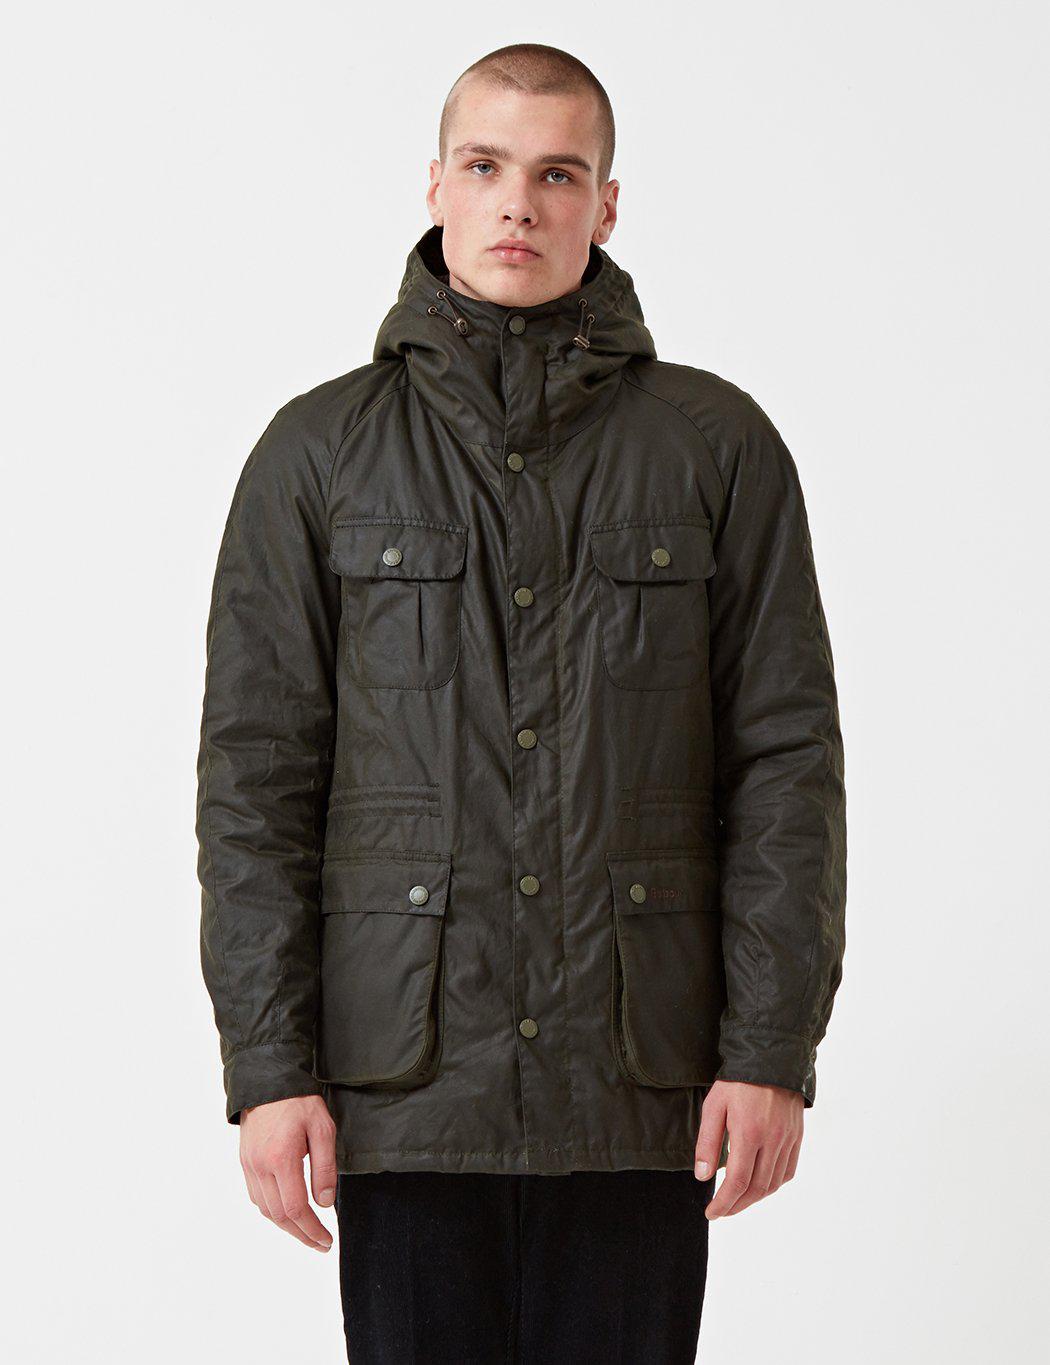 Lyst - Barbour Brindle Wax Jacket in Green for Men